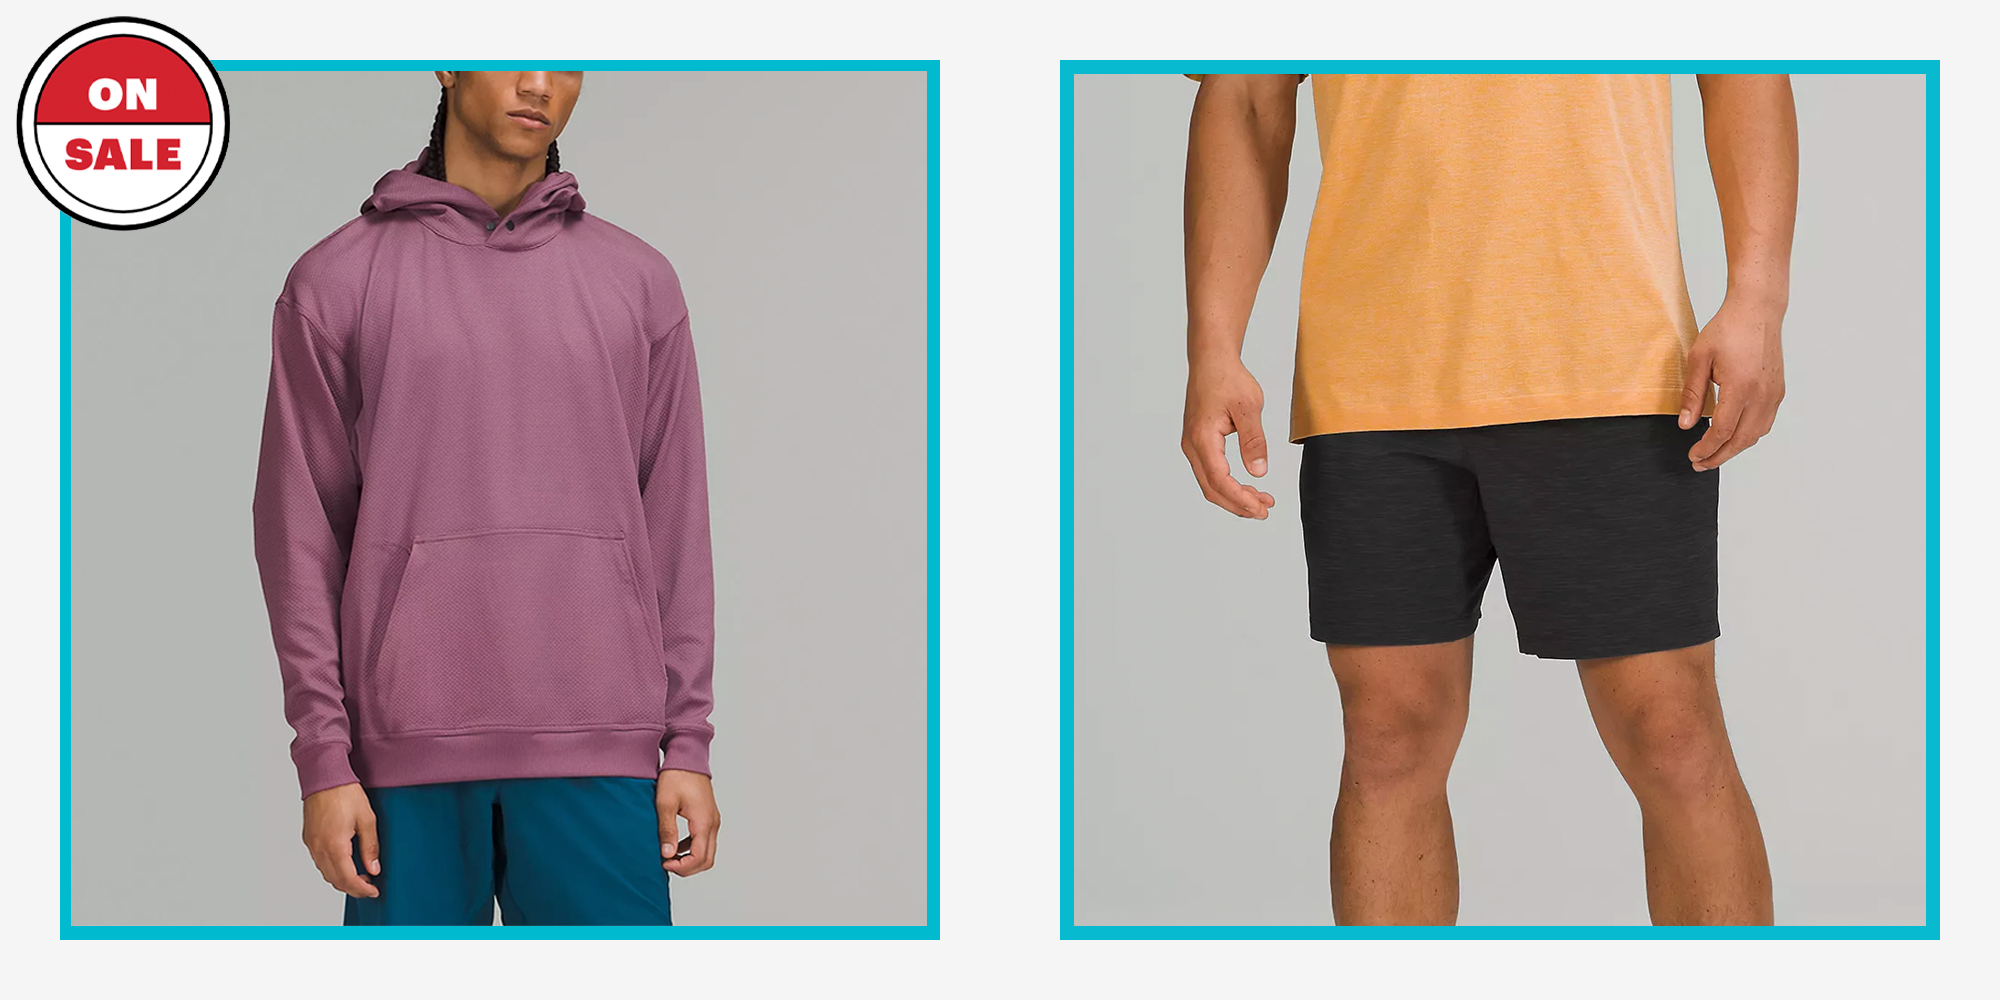 Lululemon We-Made-Too Much Deals: Save on Fall Workout Apparel for Men